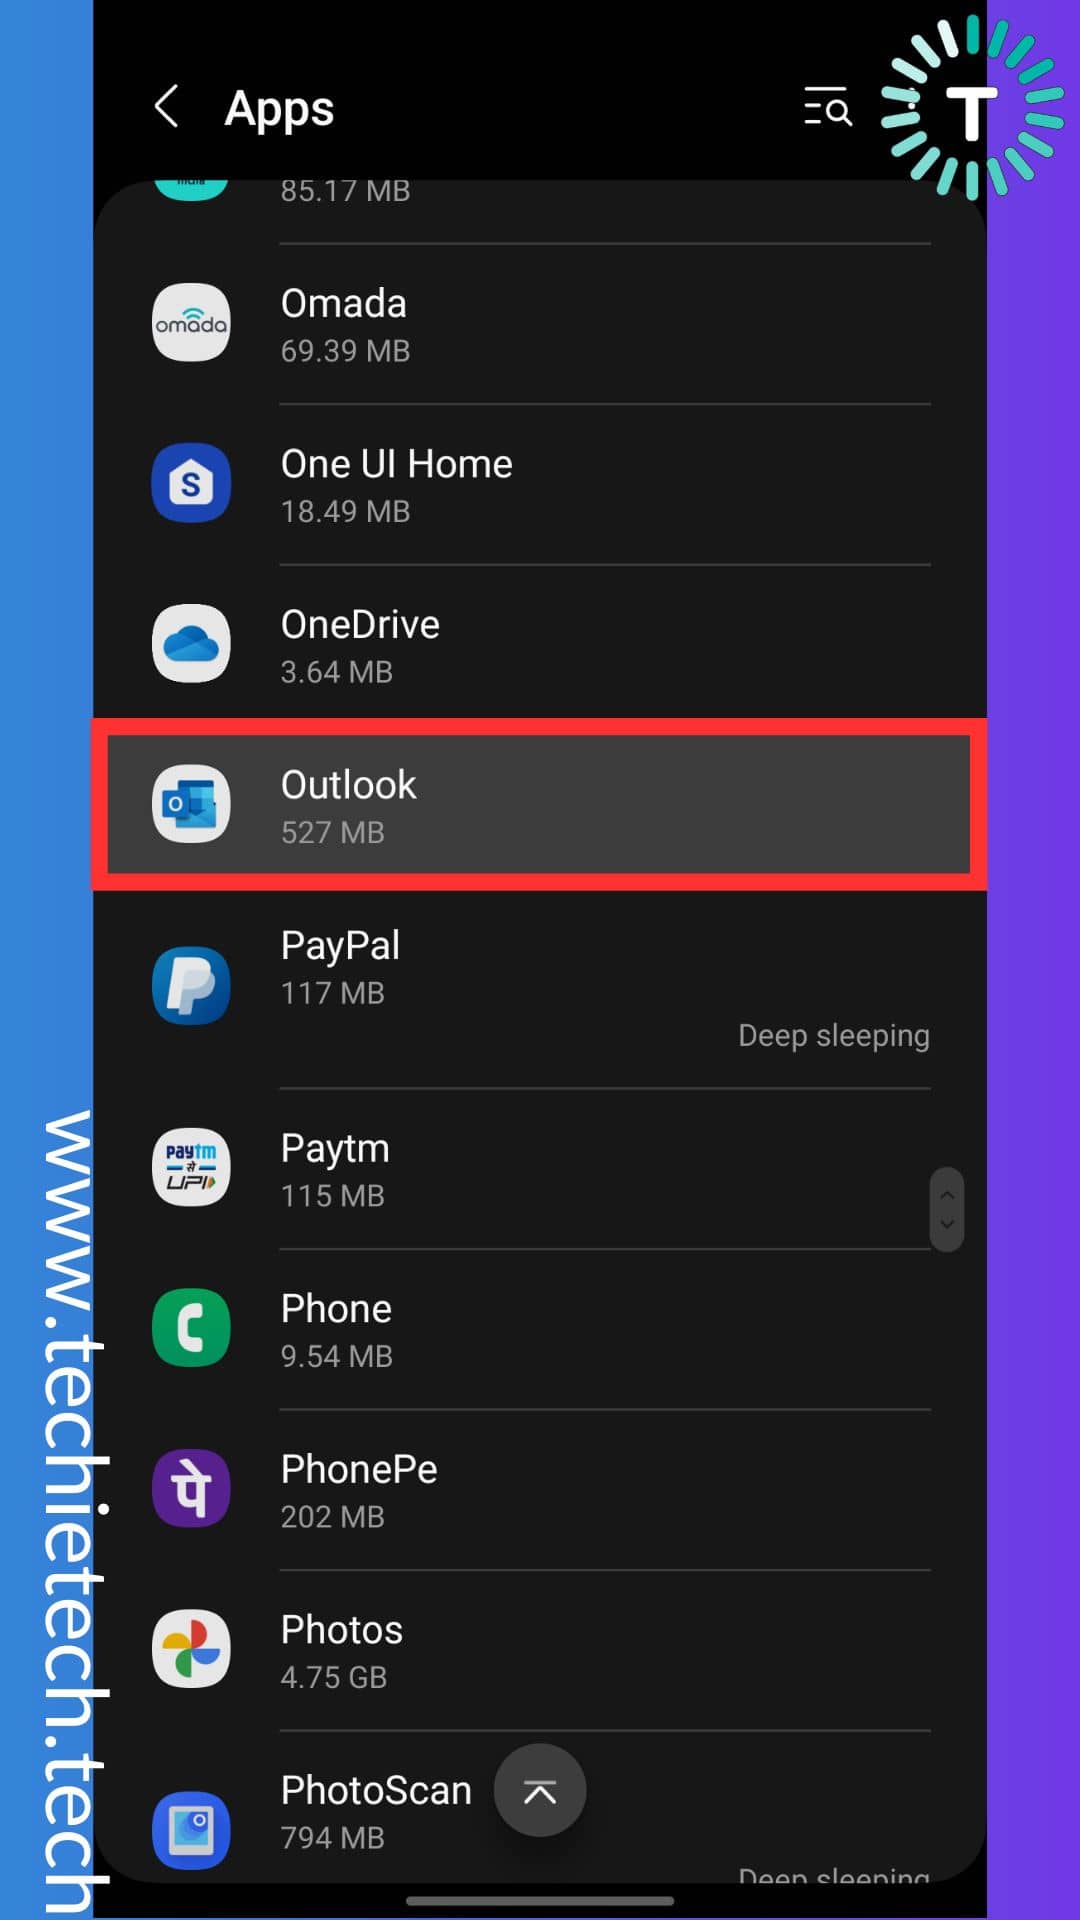 Find and tap on Microsoft Outlook